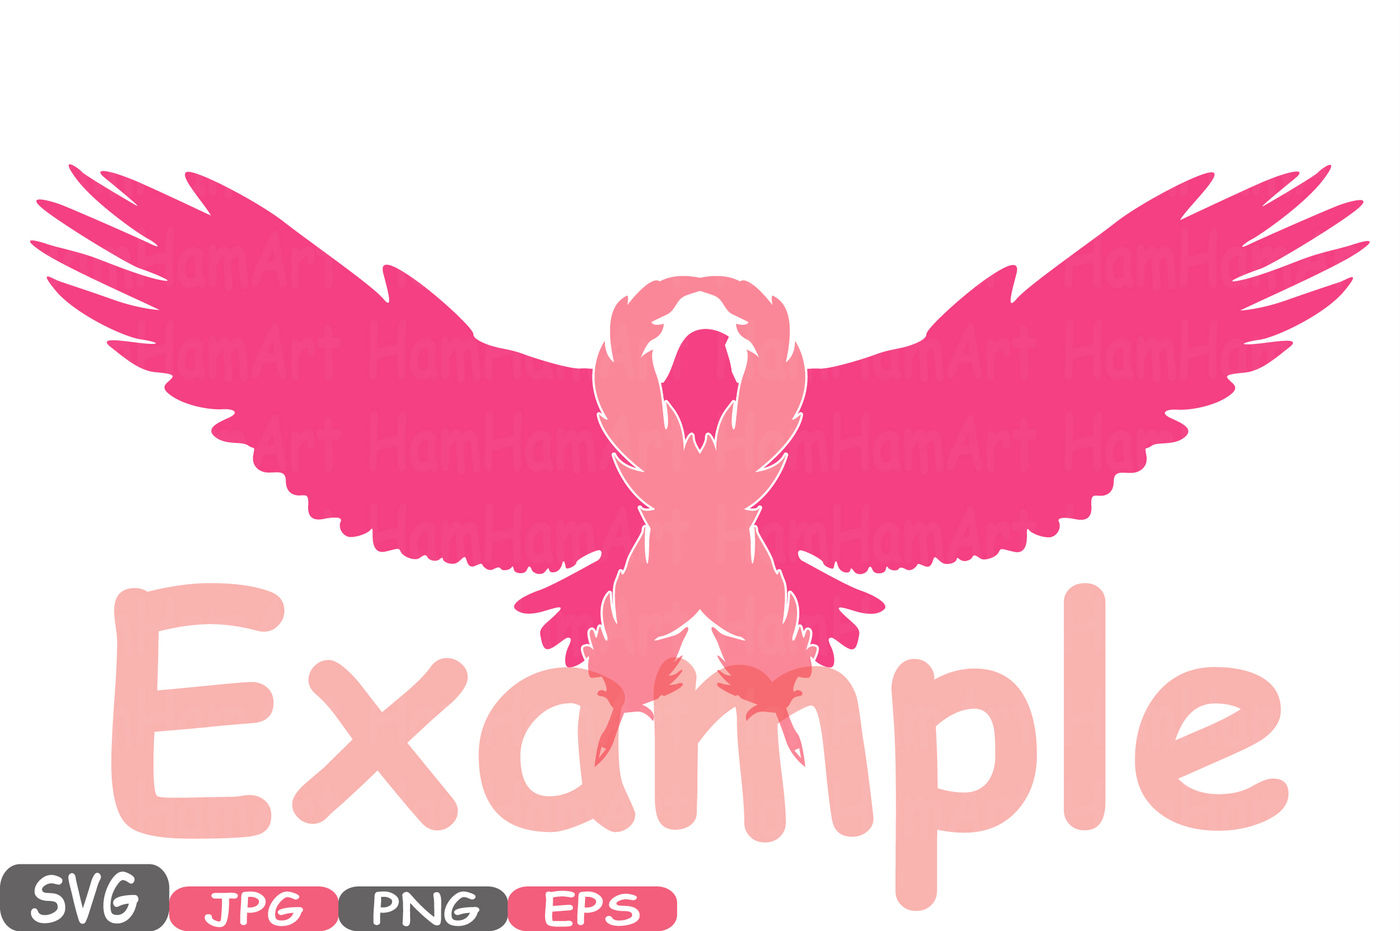 Download Eagle Breast Cancer birds Feathers SVG Cricut Silhouette ...